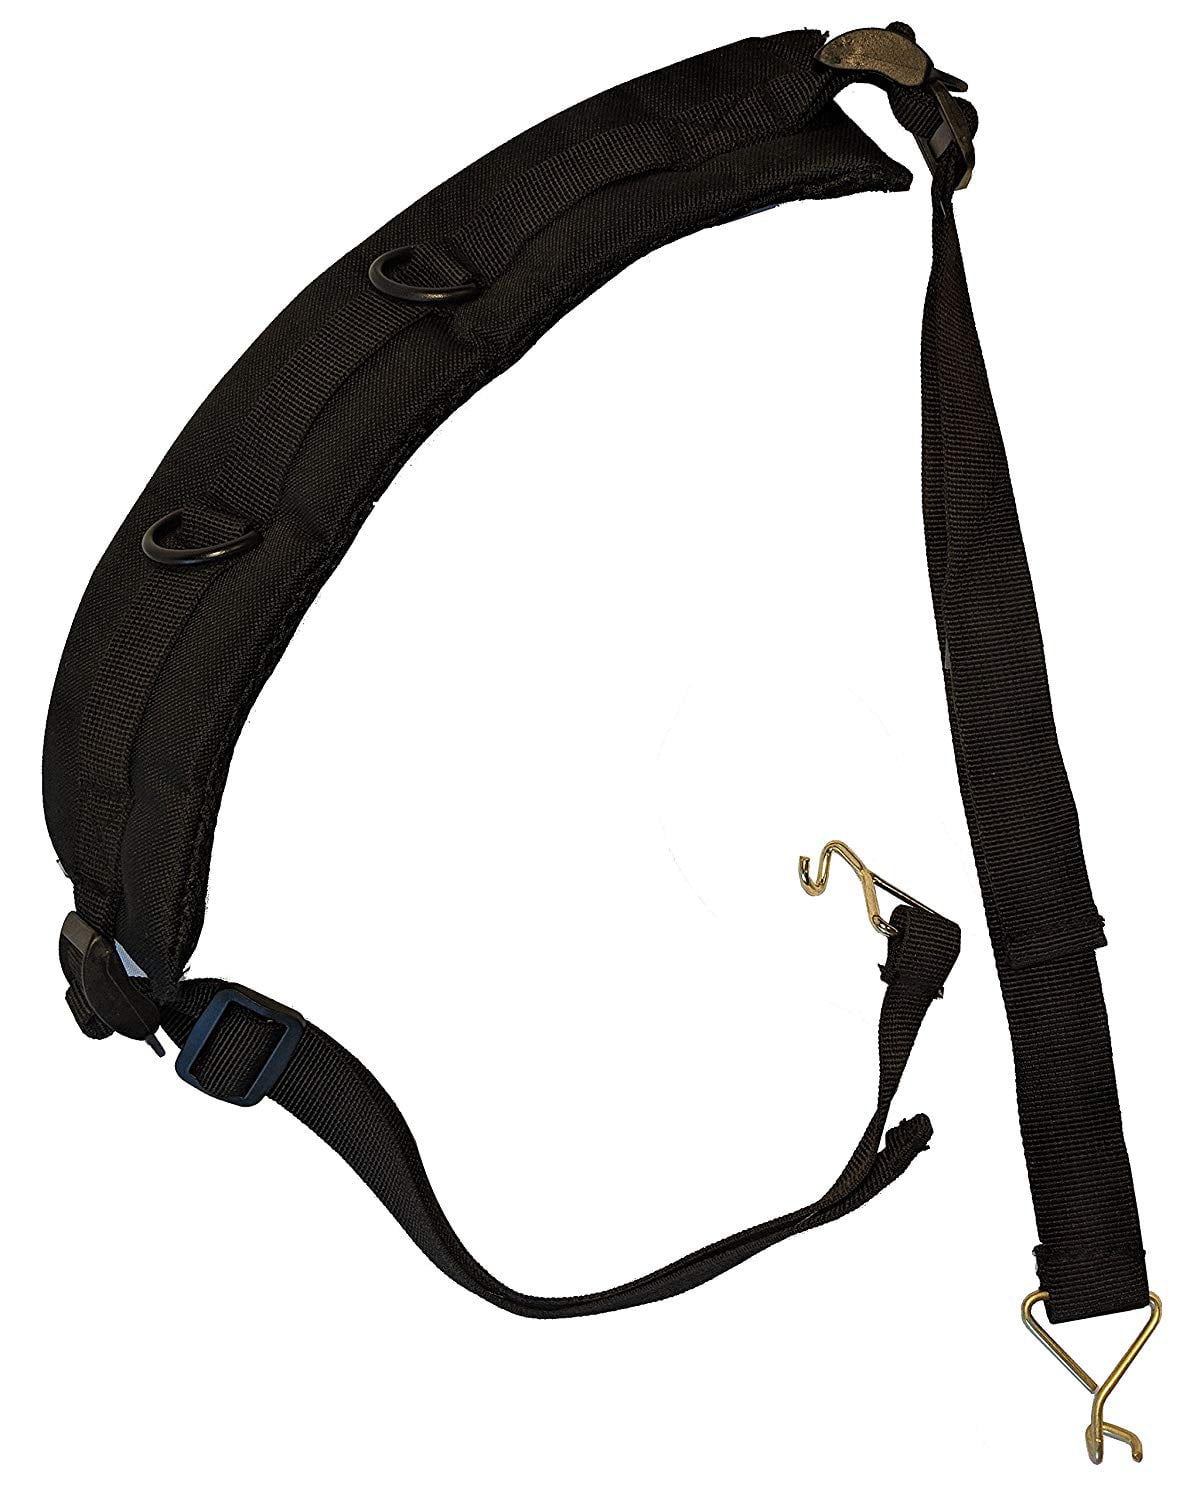 1 pair Shoulder Strap Replacement for Bucket GM and PM bag